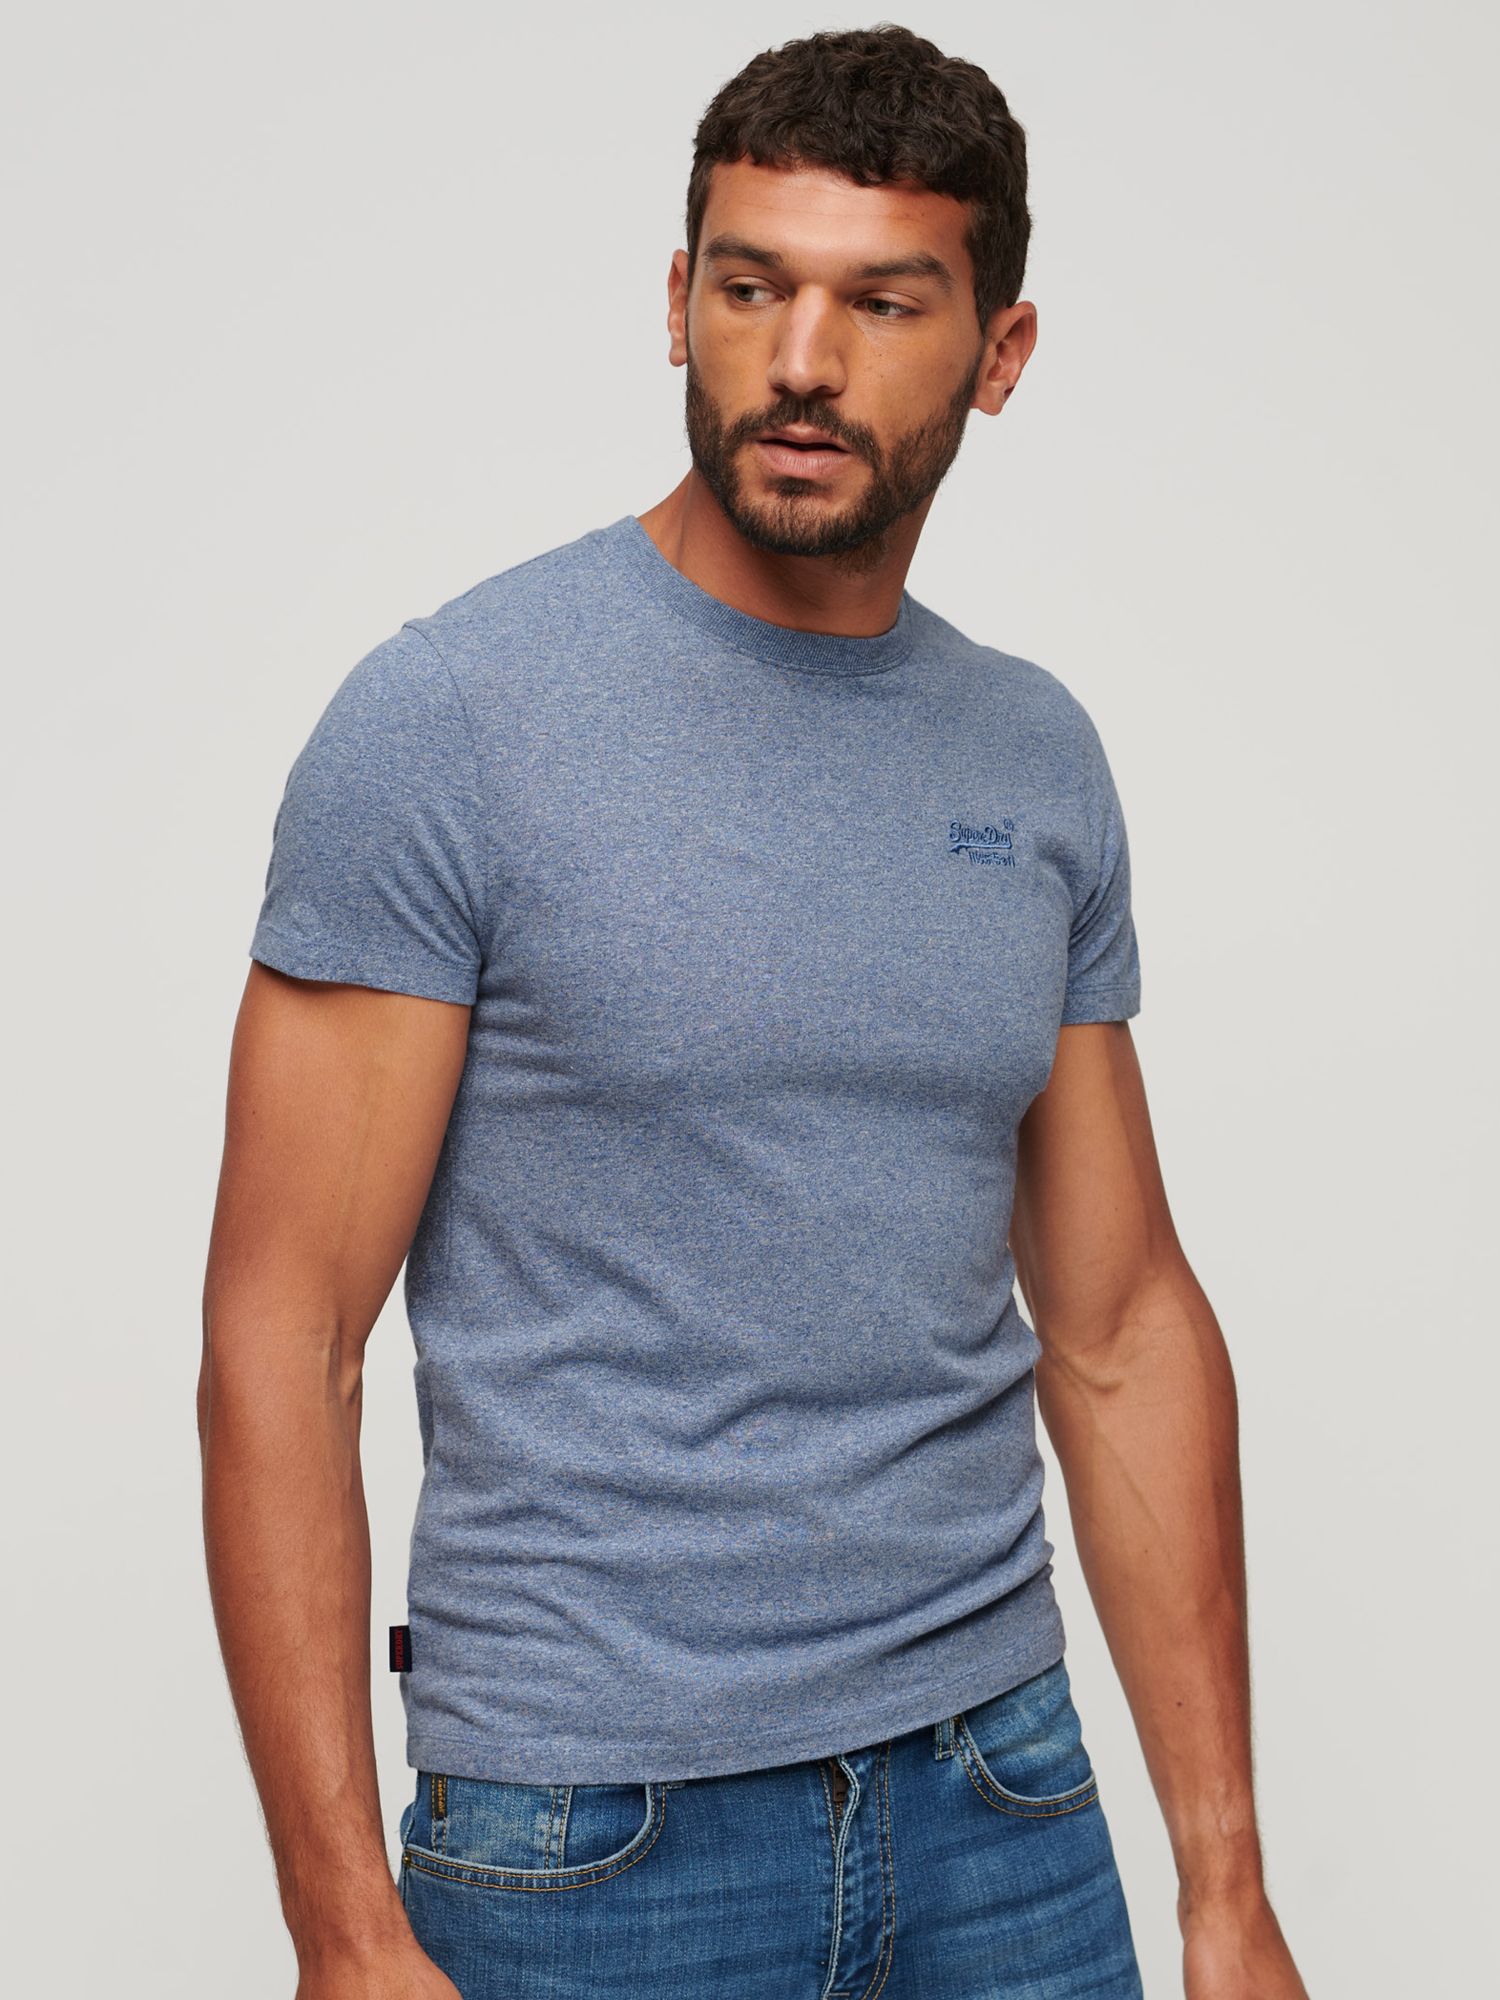 Superdry Essential Cotton T-Shirt, Blue Marl at John Lewis & Partners